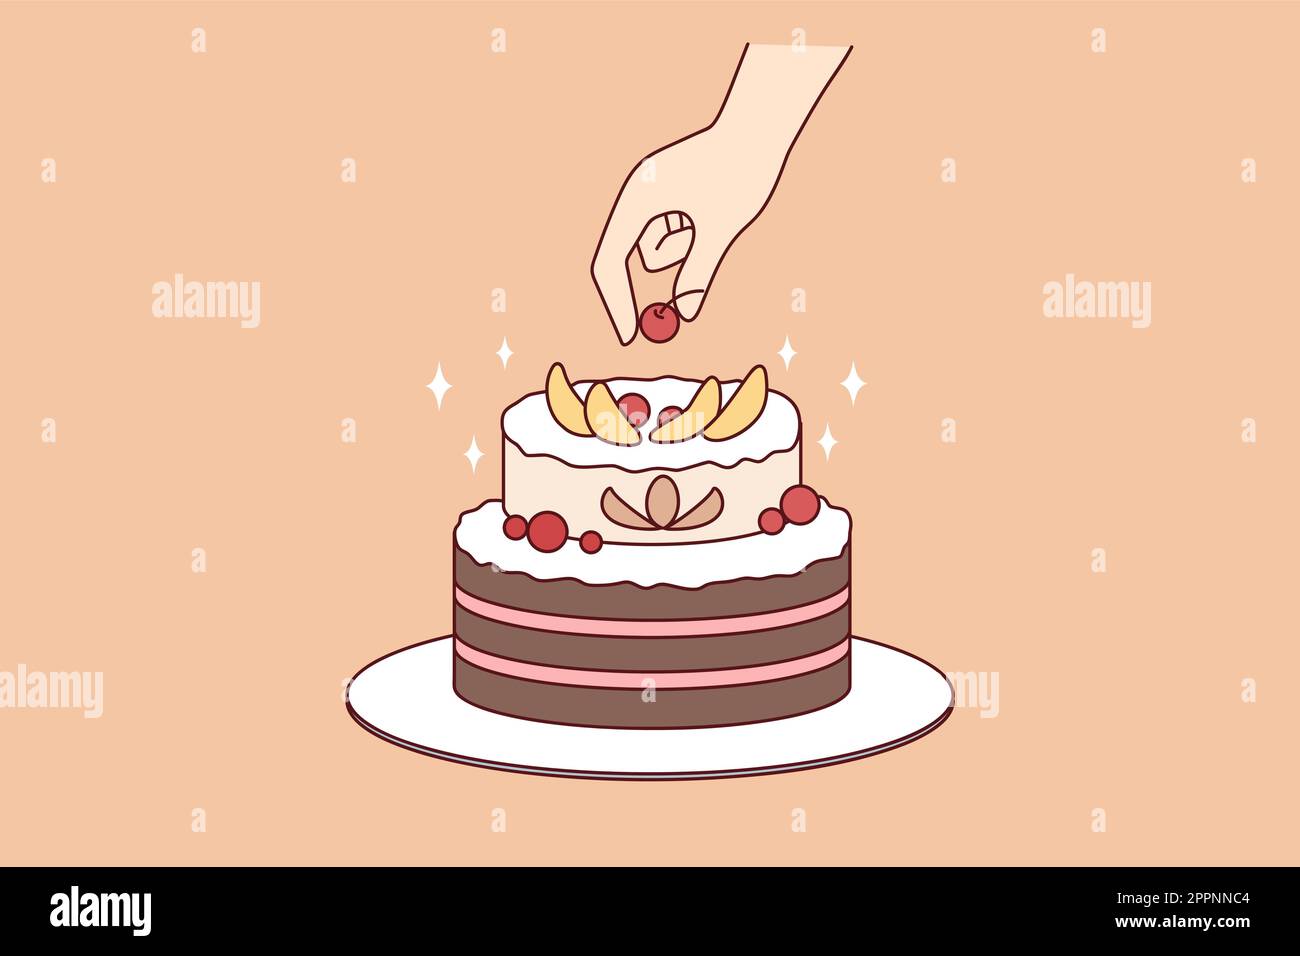 Person decorate cake with fruit Stock Vector